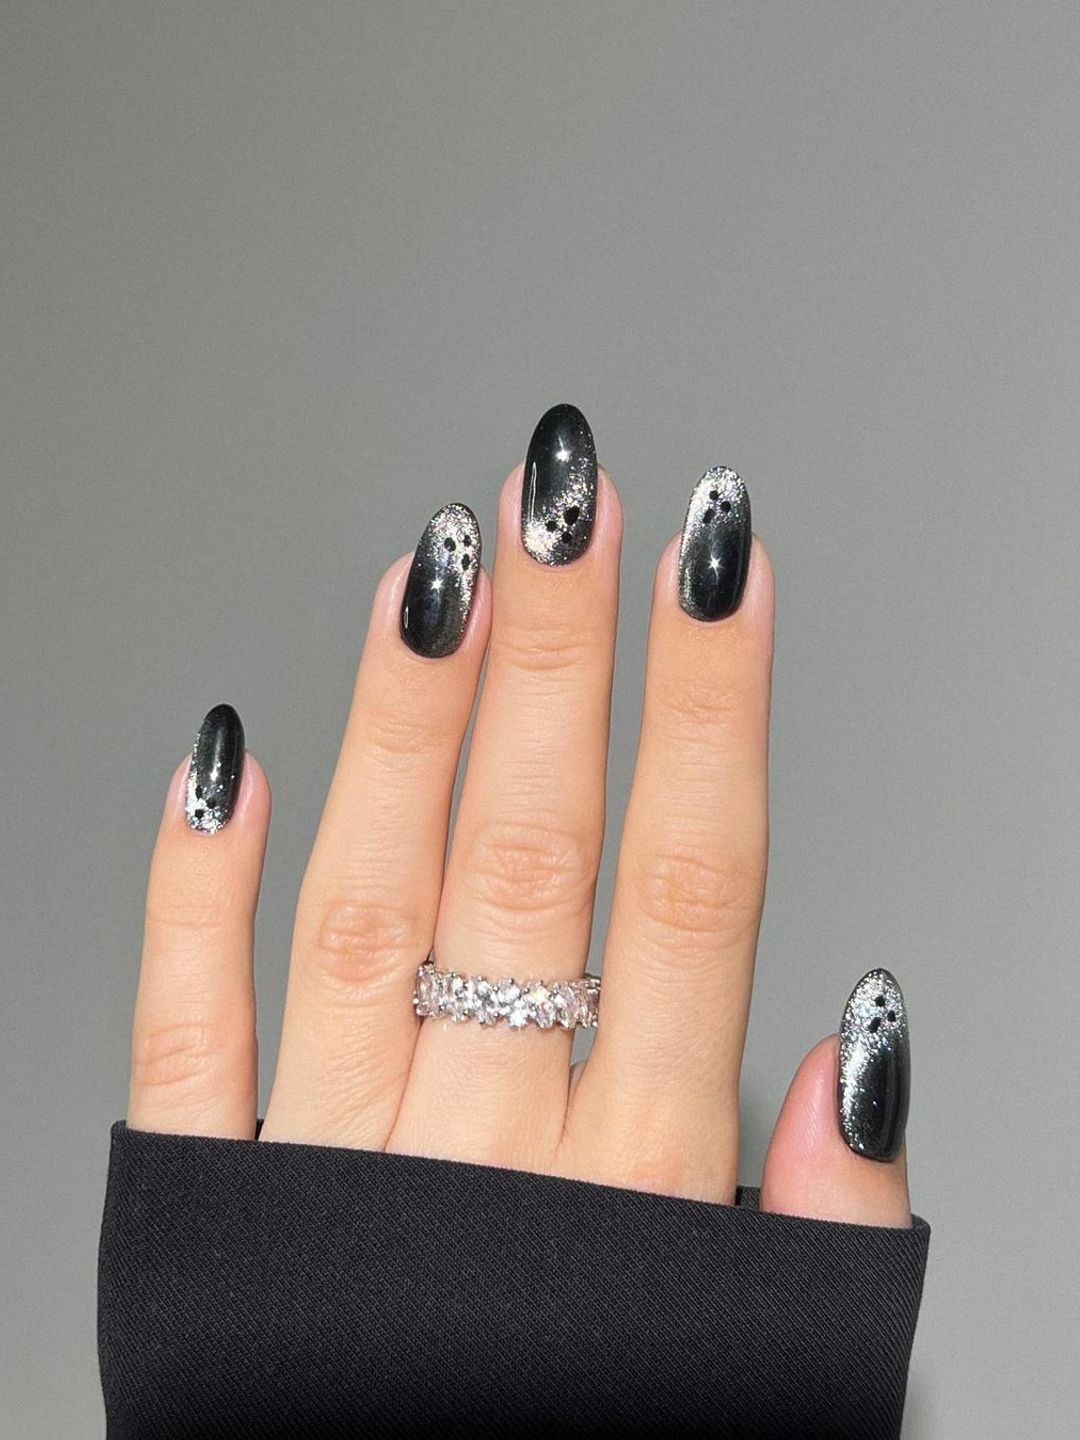 Black nails with glitter ghosts 